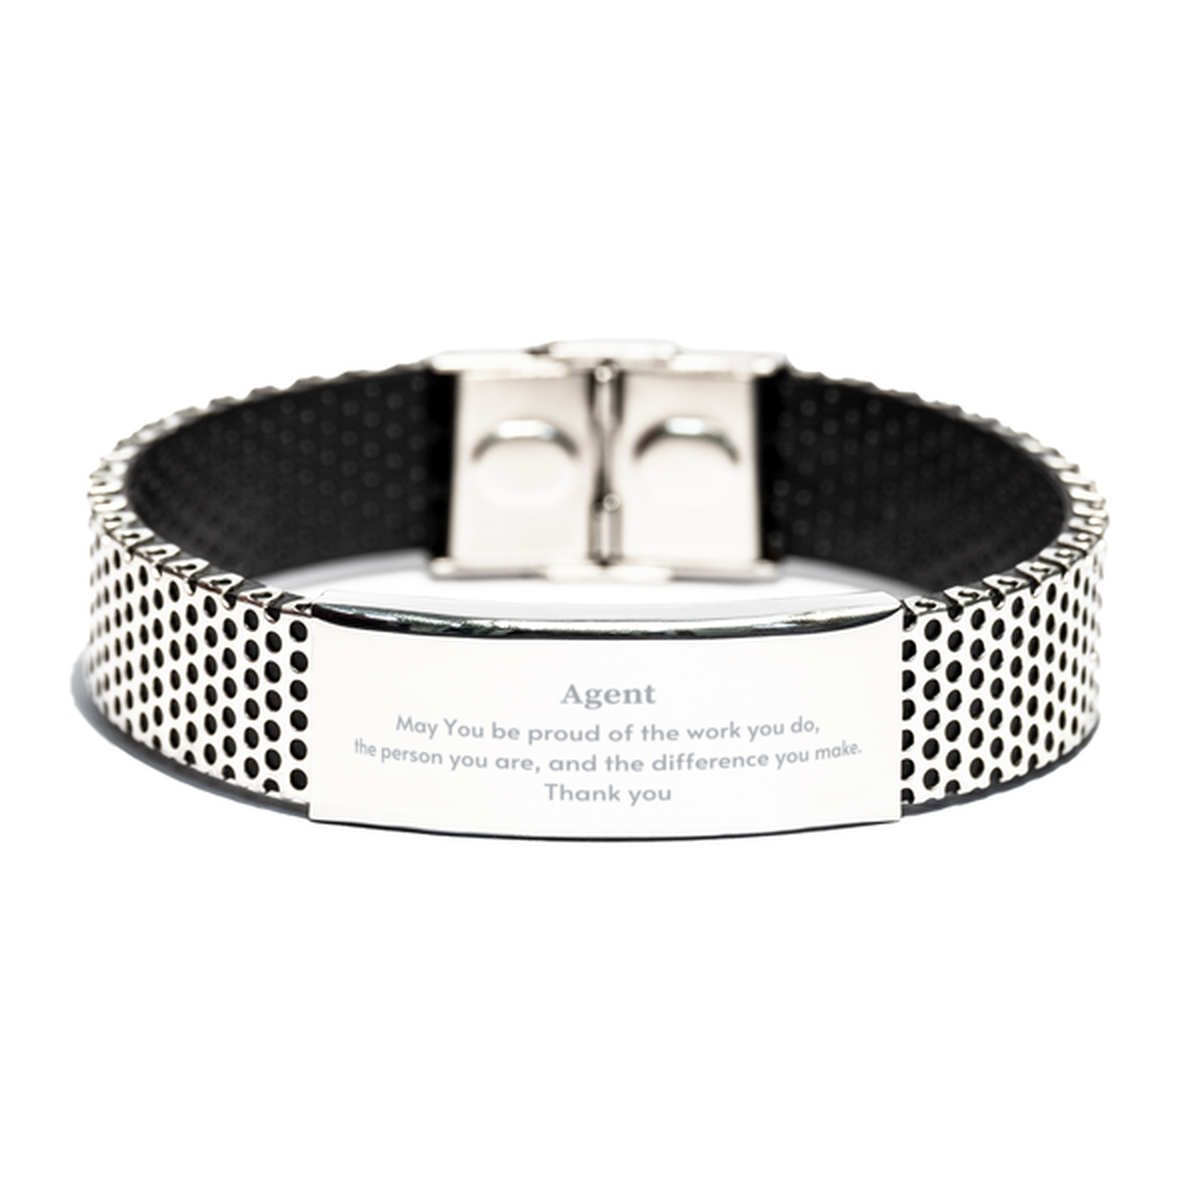 Heartwarming Stainless Steel Bracelet Retirement Coworkers Gifts for Agent, Agent May You be proud of the work you do, the person you are Gifts for Boss Men Women Friends